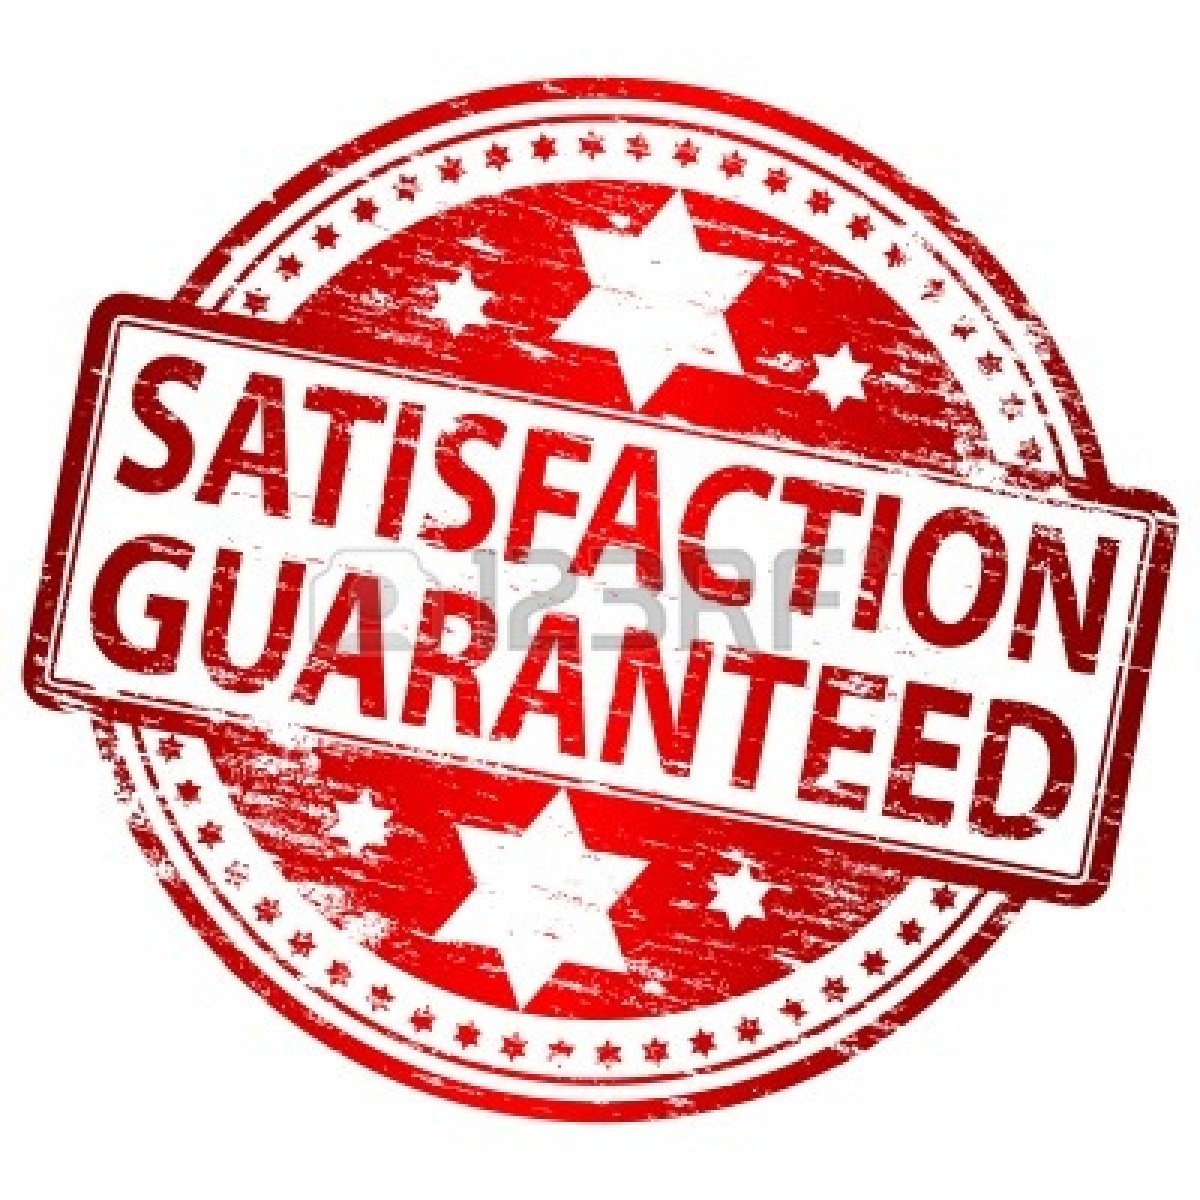 8986328 satisfaction guaranteed rubber stamp 687407ca 2284 4540 98dd be3e0b649d53